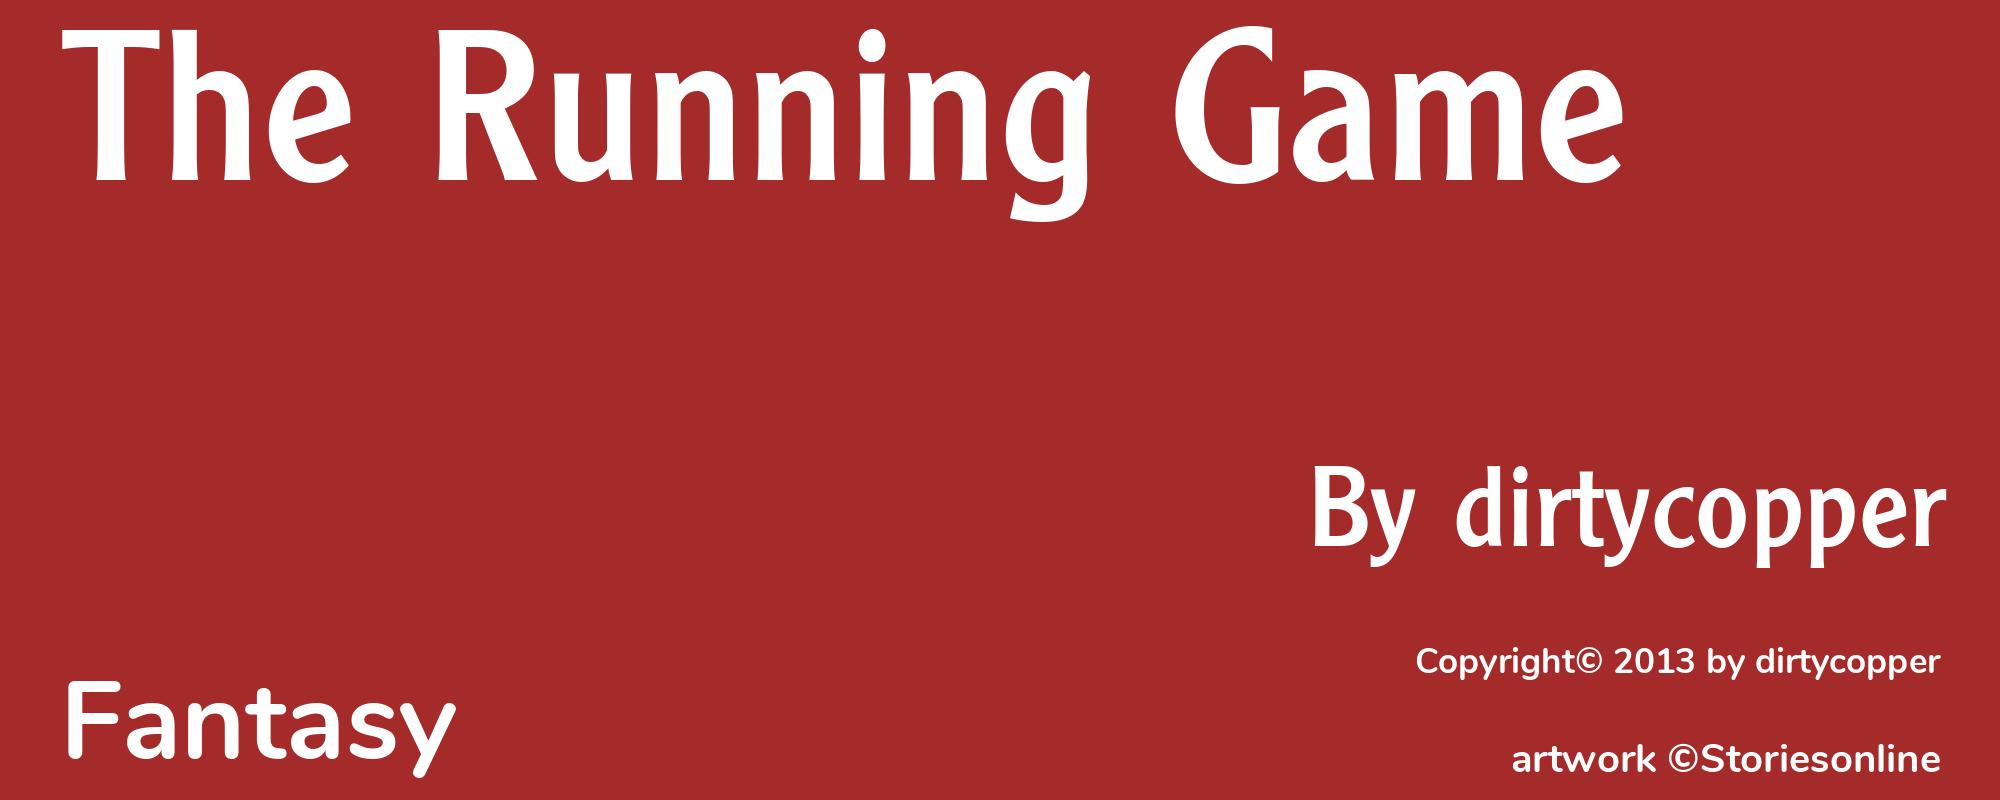 The Running Game - Cover